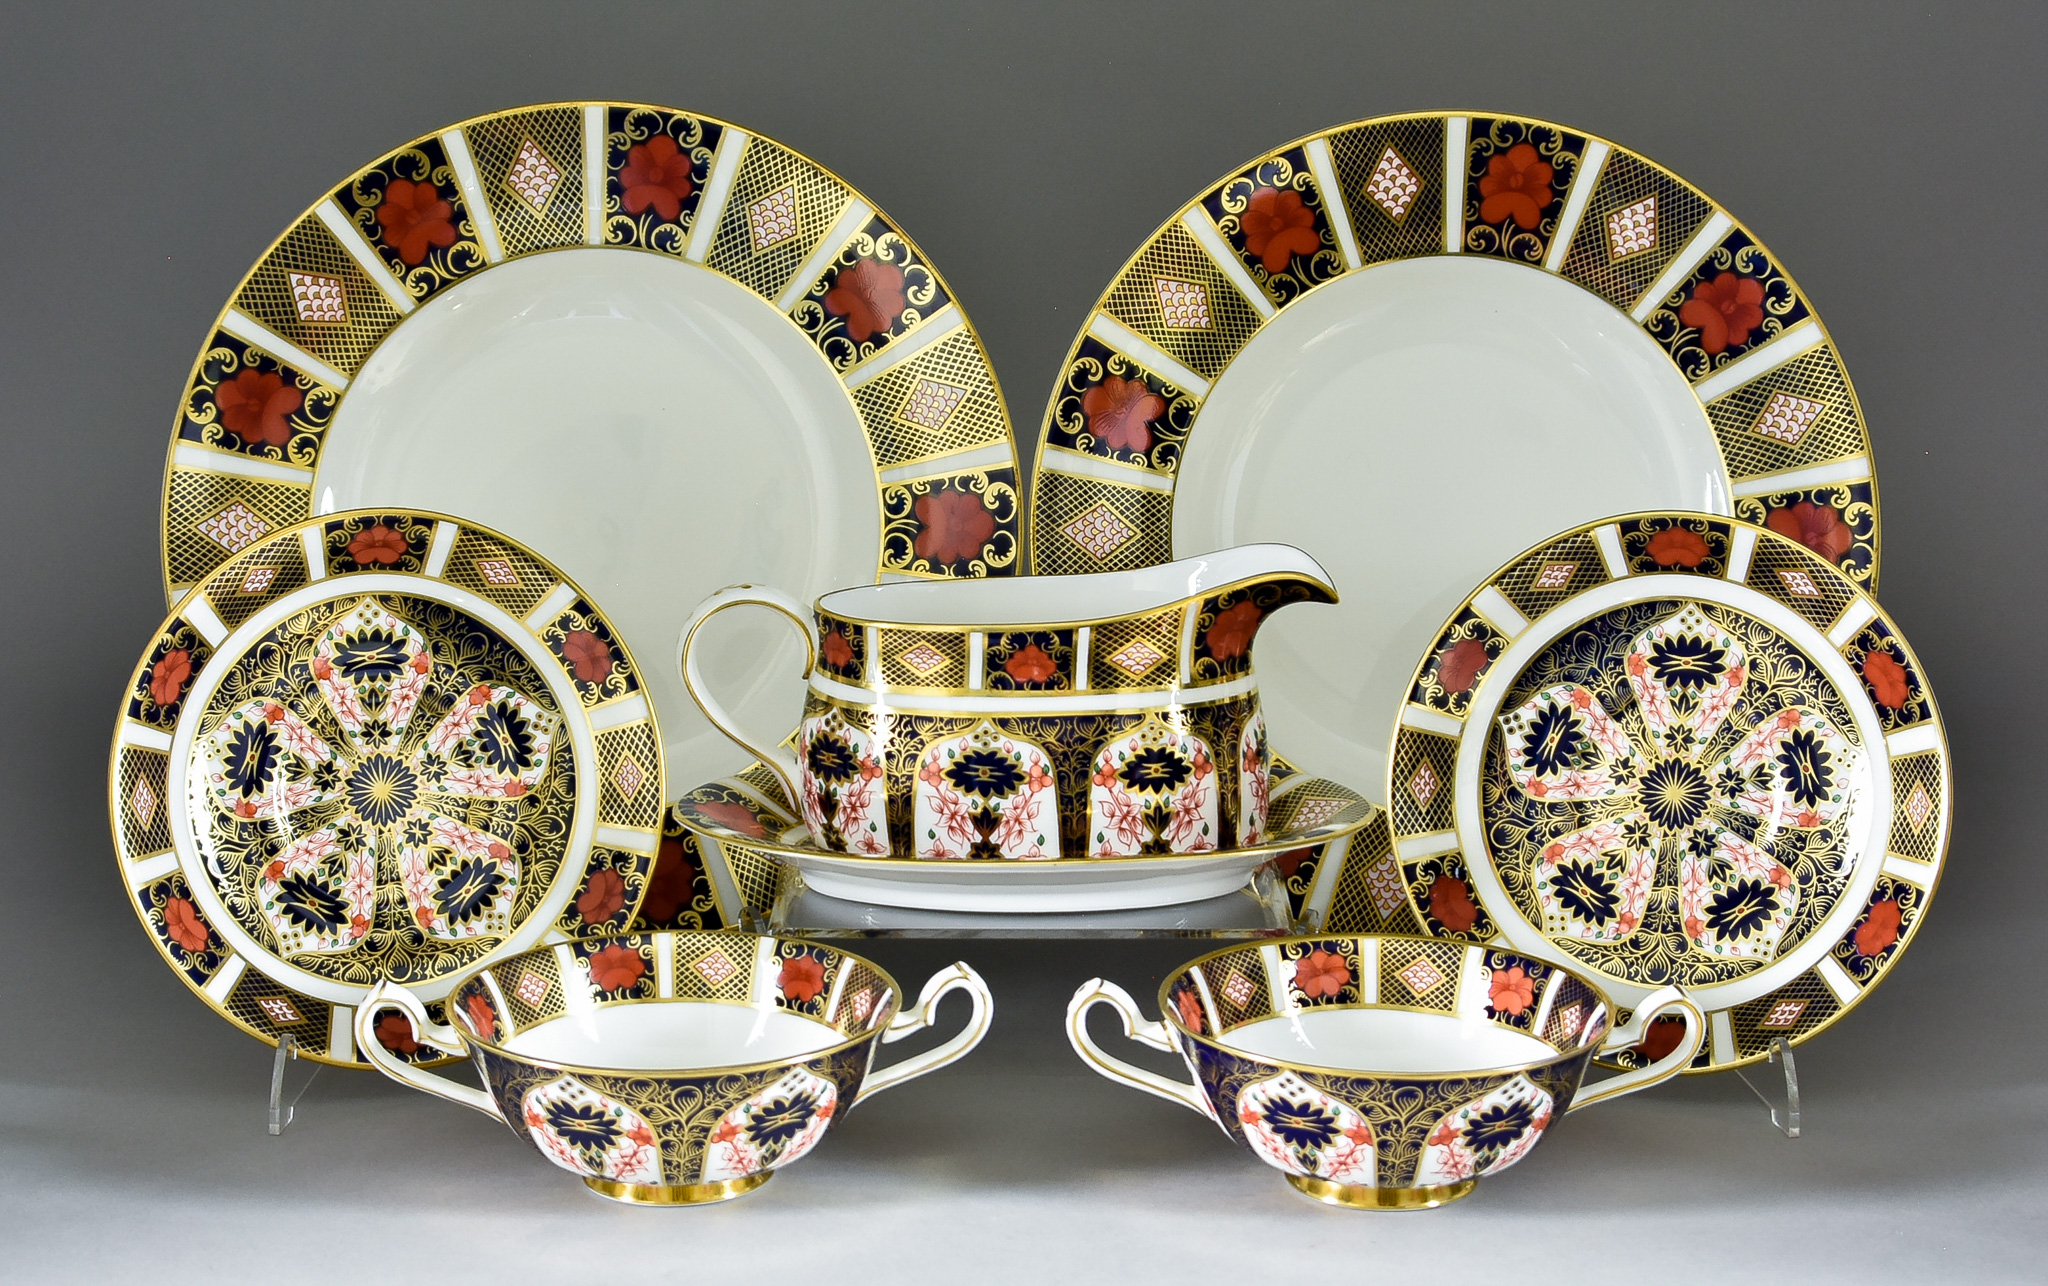 A Royal Crown Derby Bone China "Imari" Pattern Matched Dinner Service, 20th Century, for ten place